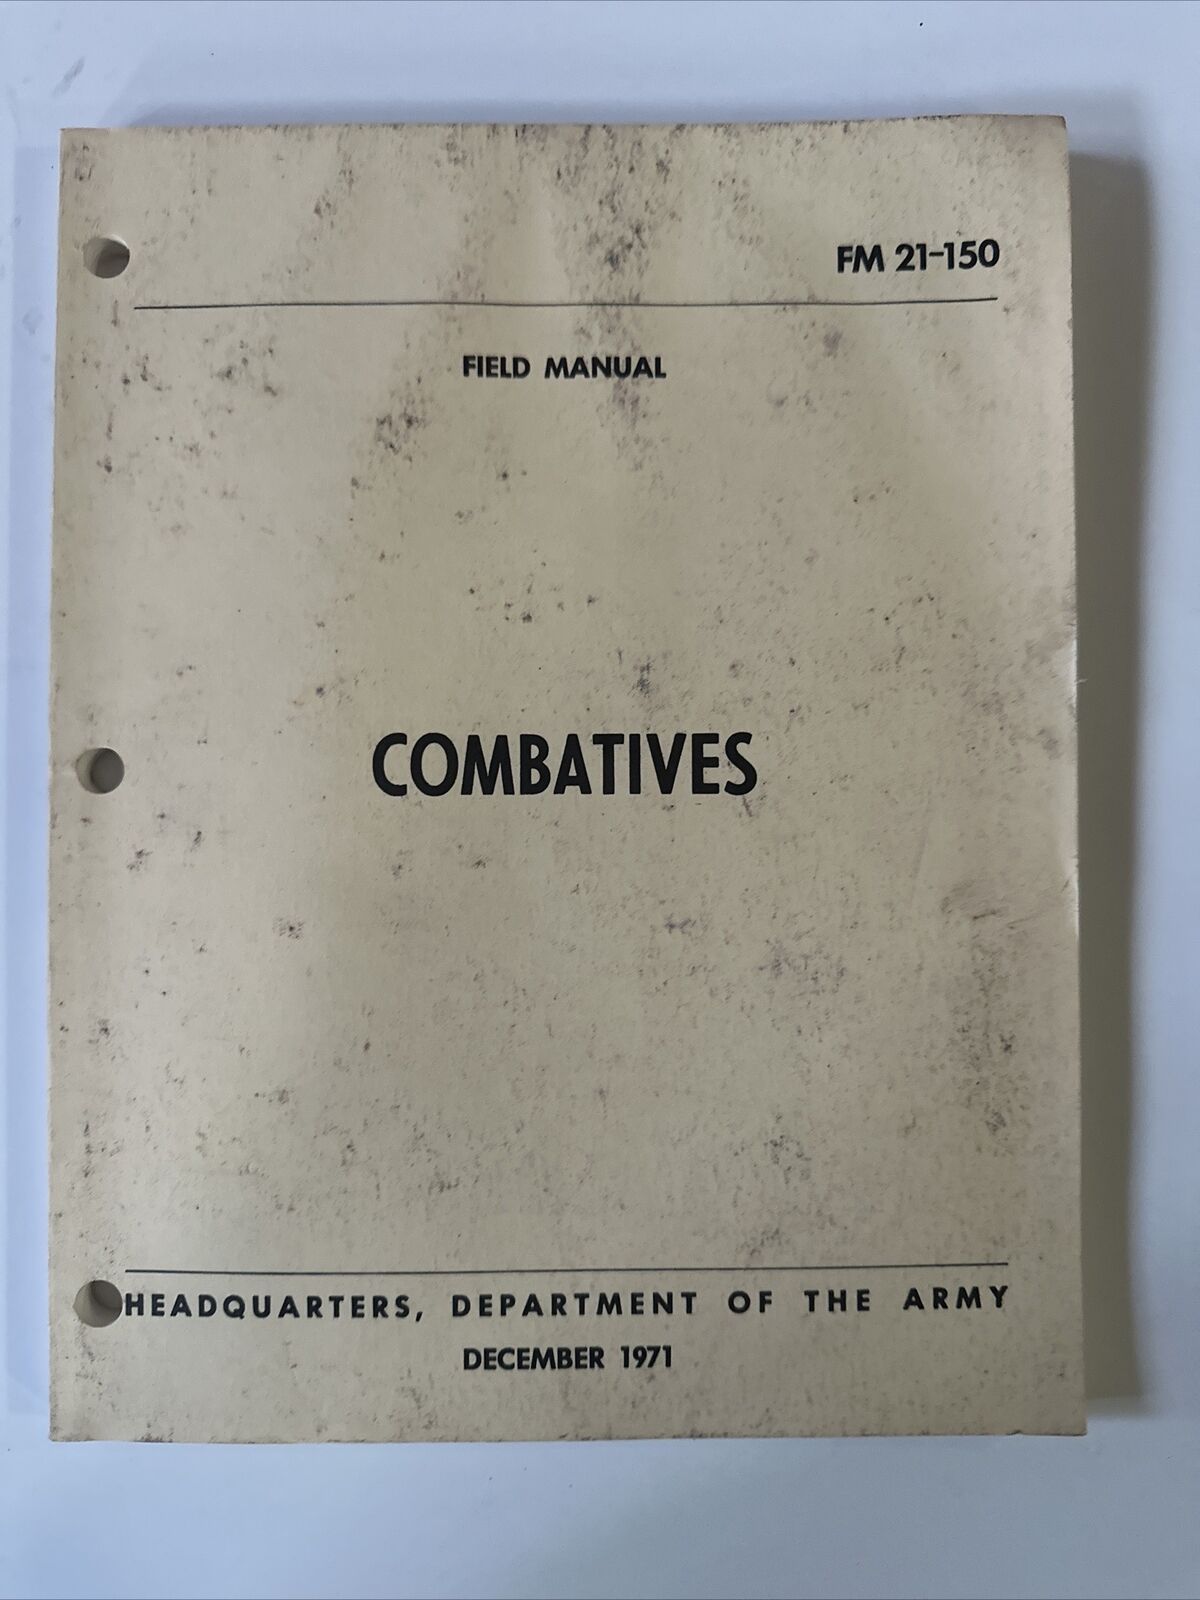 Field Manual FM-21-150 - COMBATIVES - HEADQUARTERS, DEPARTMENT OF THE ARMY 1971